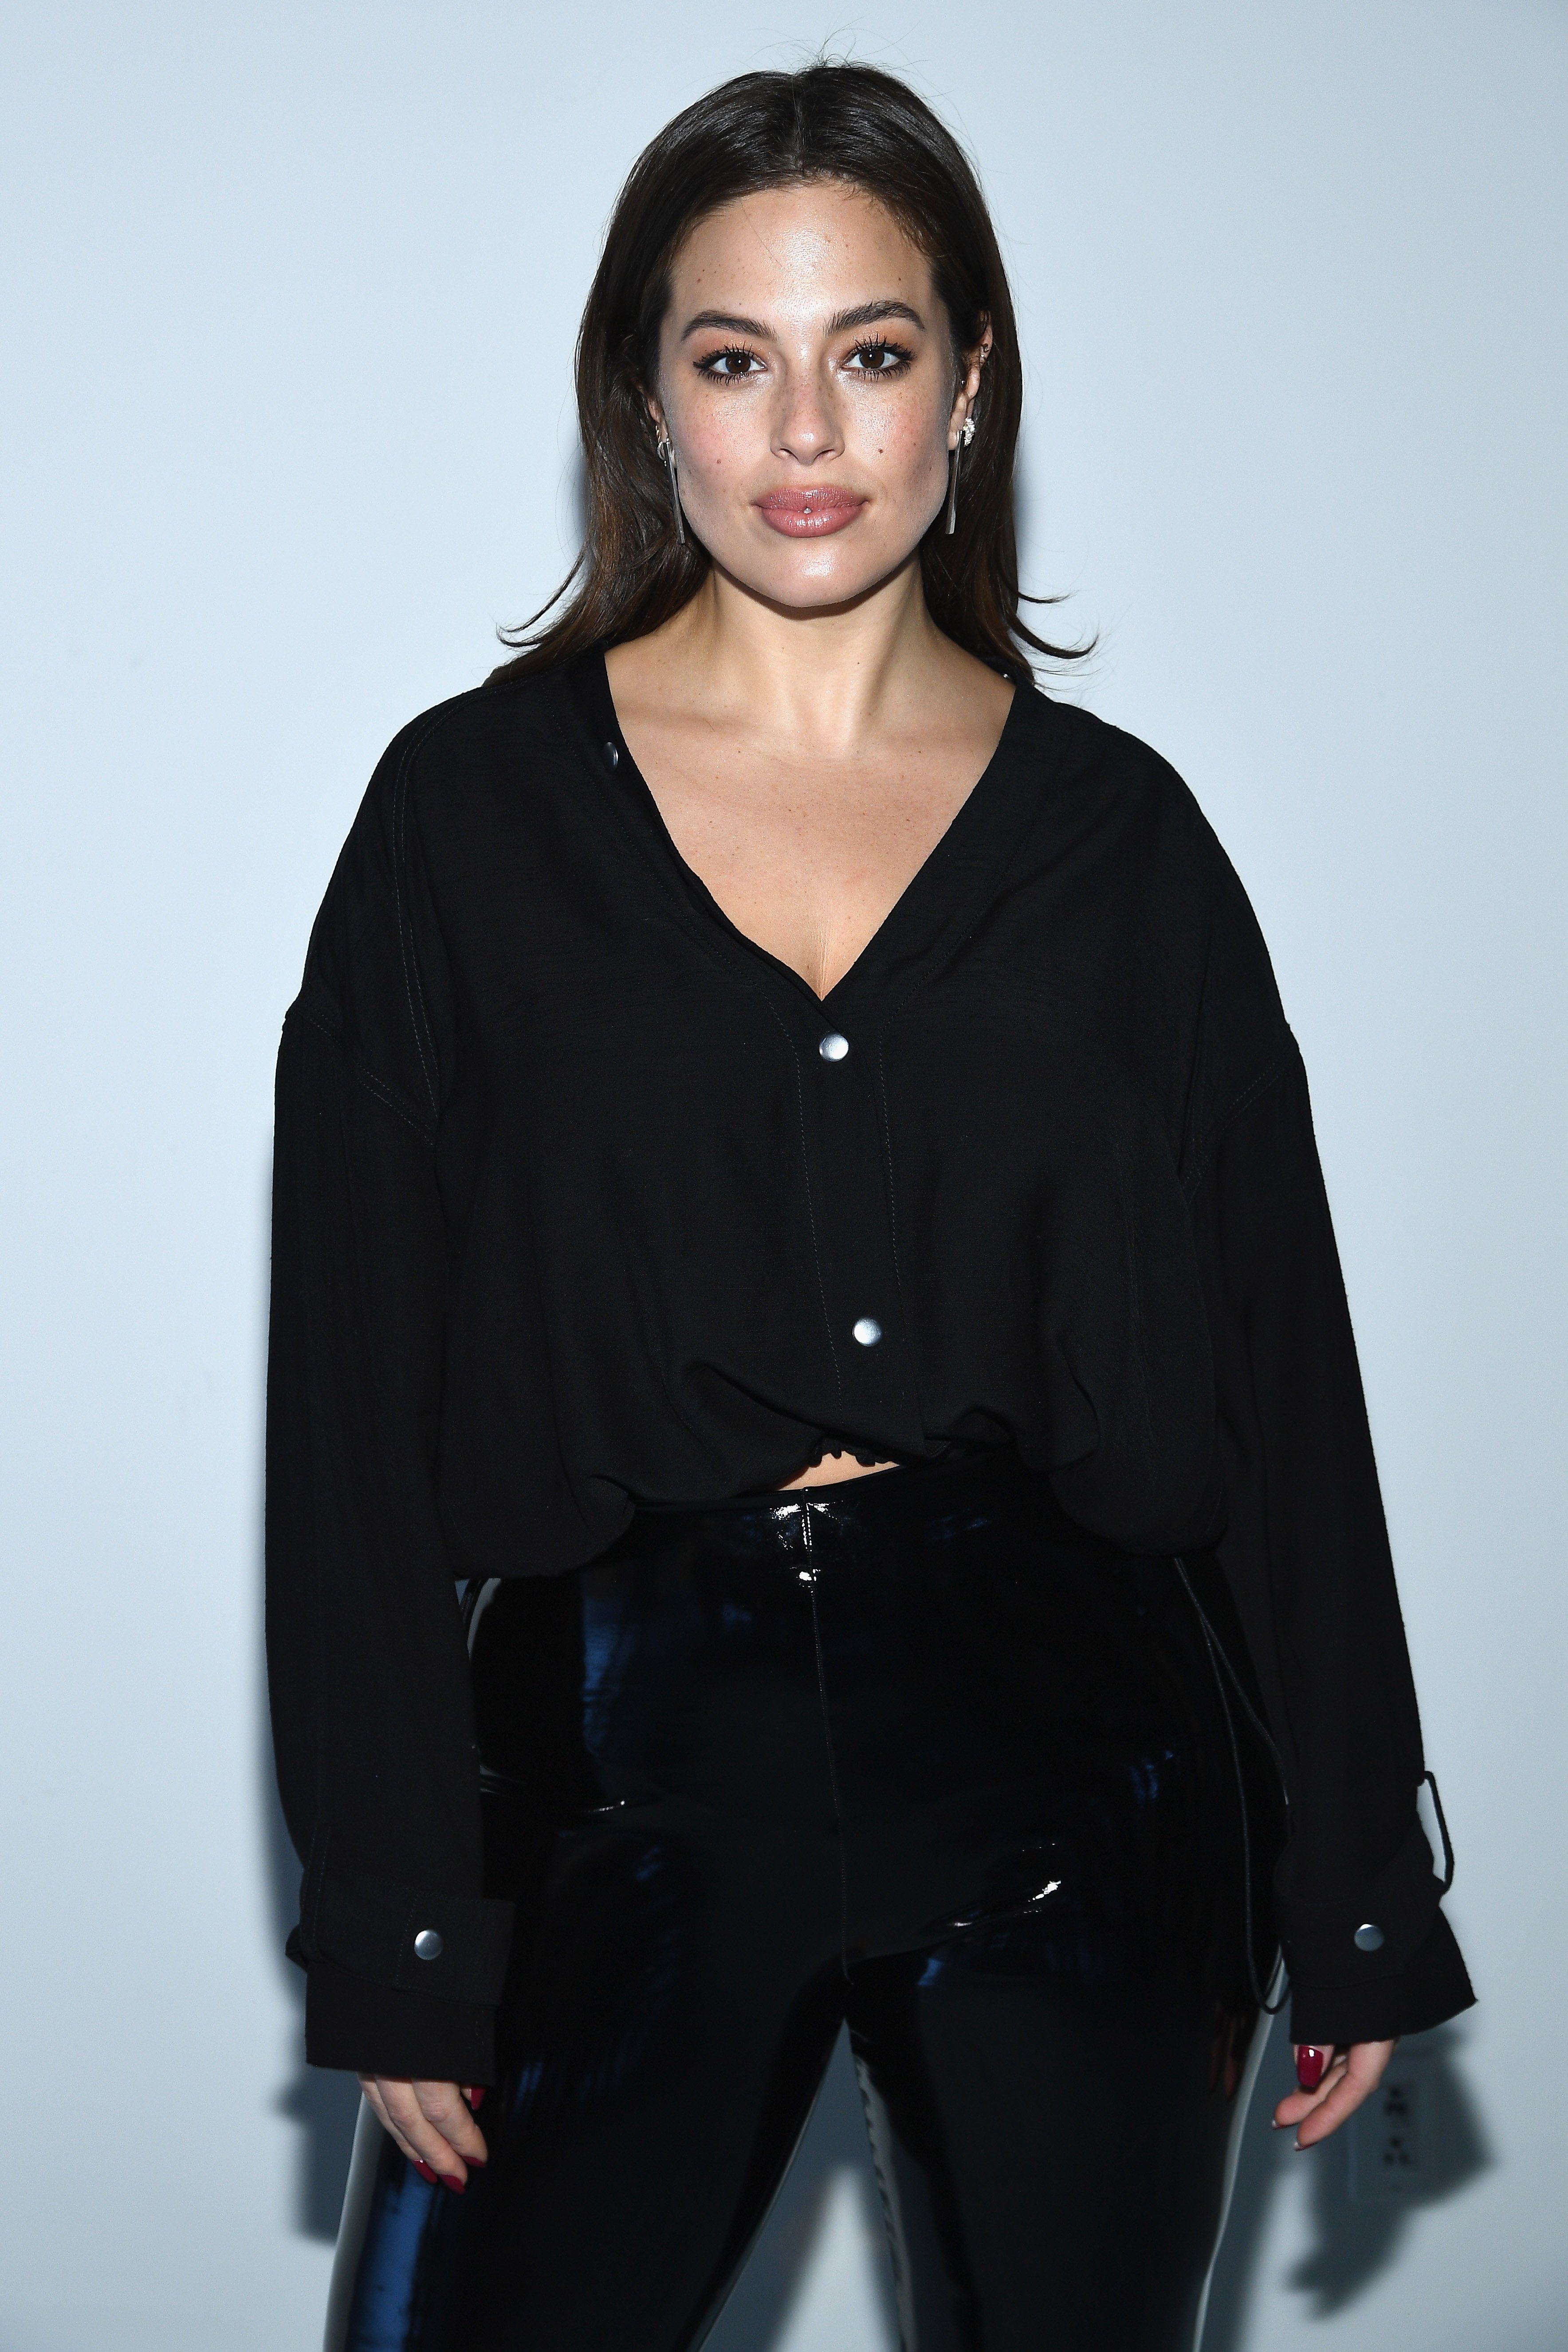 Ashley Graham at the 3.1 Phillip Lim Fashion Show during New York Fashion Week on Feb. 11, 2019 in New York City | Photo: Getty Images